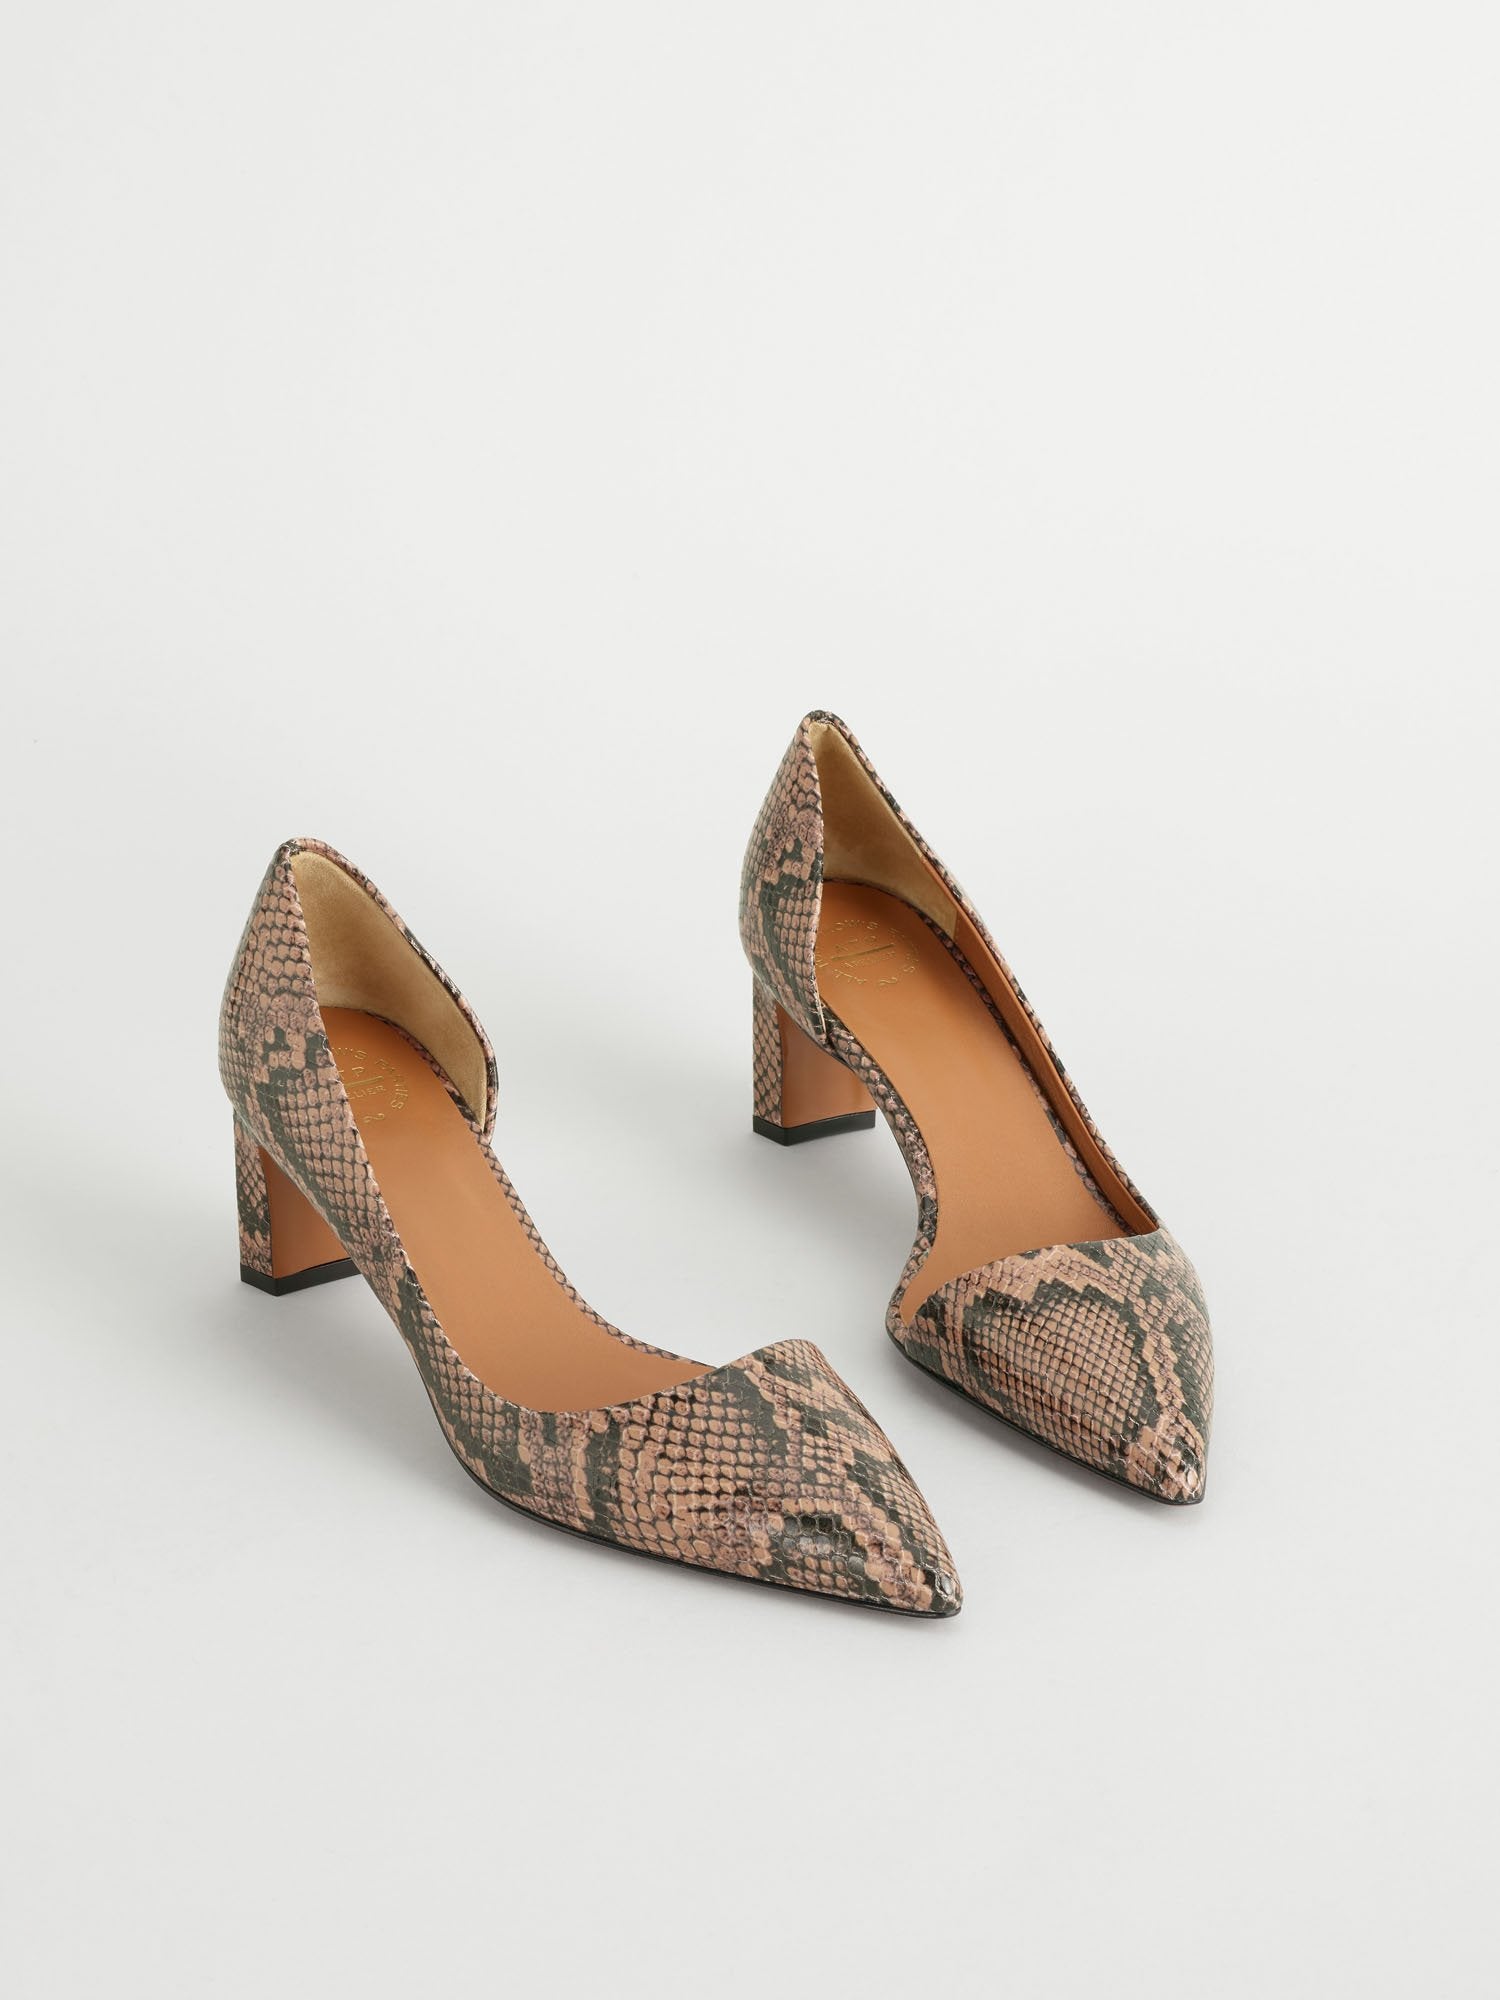 Carmiano Brown Printed Snake Shoes Heels 110832  - 2